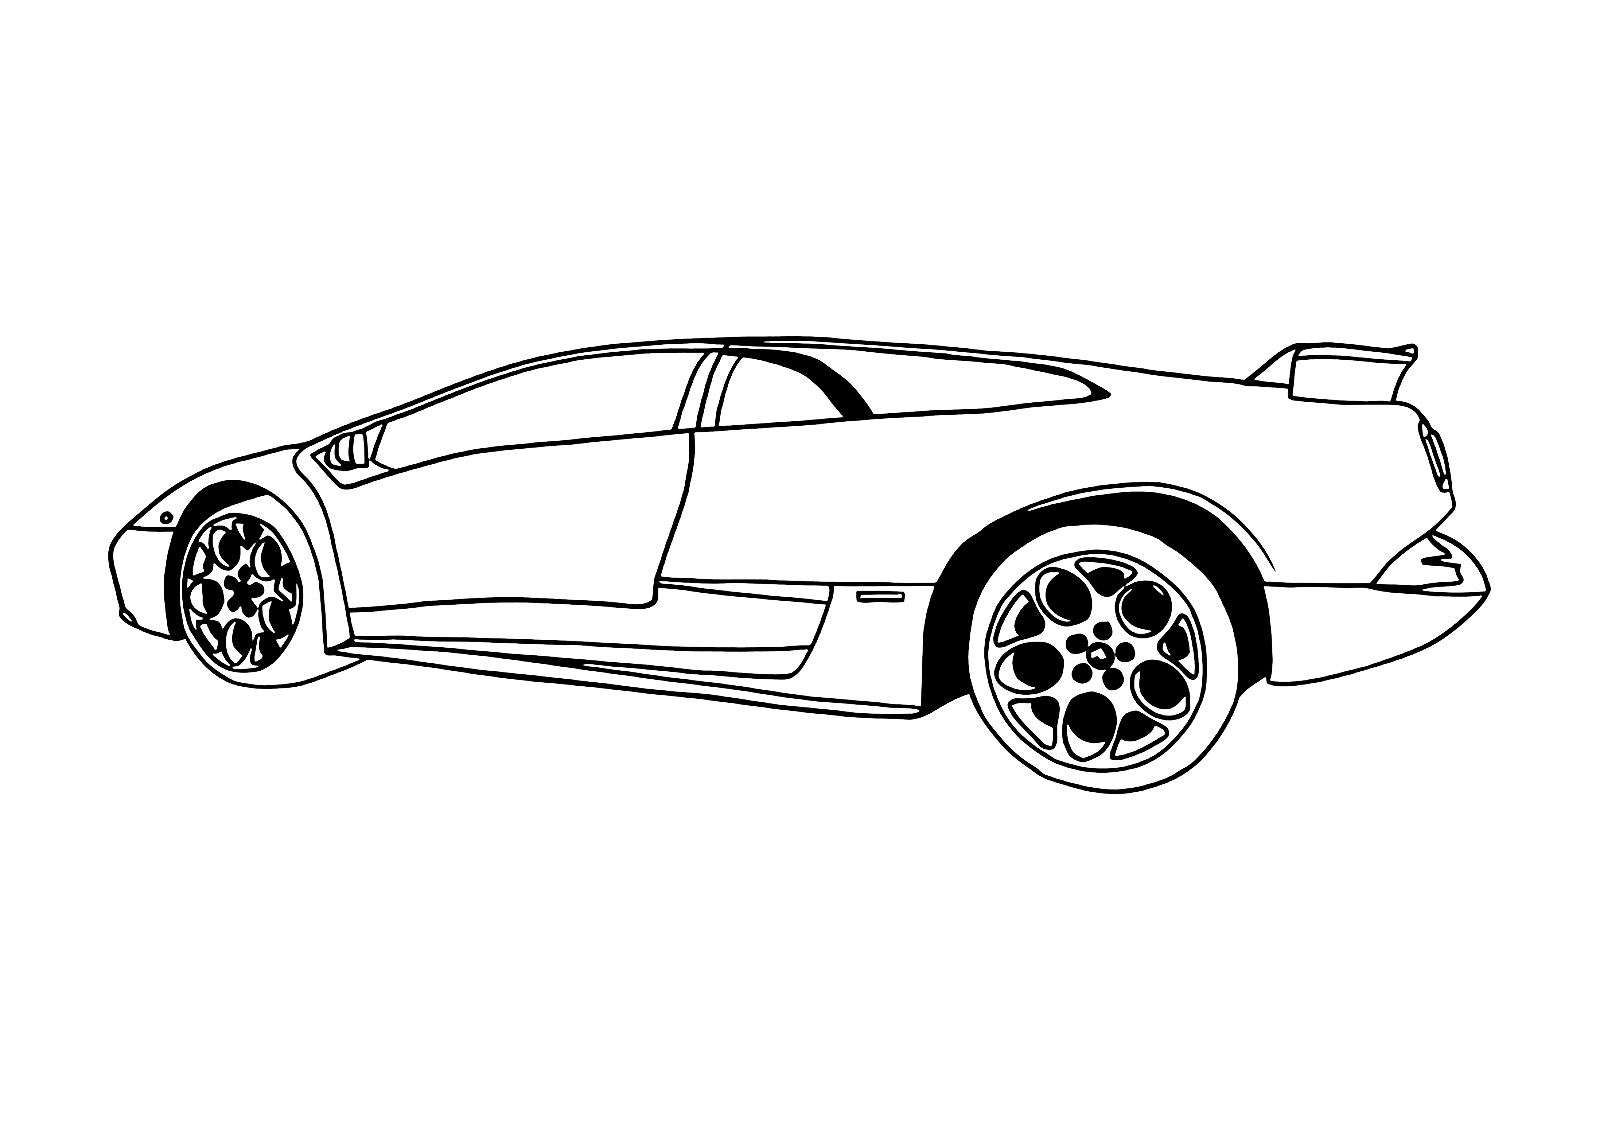 Download Lamborghini Coloring Pages to download and print for free